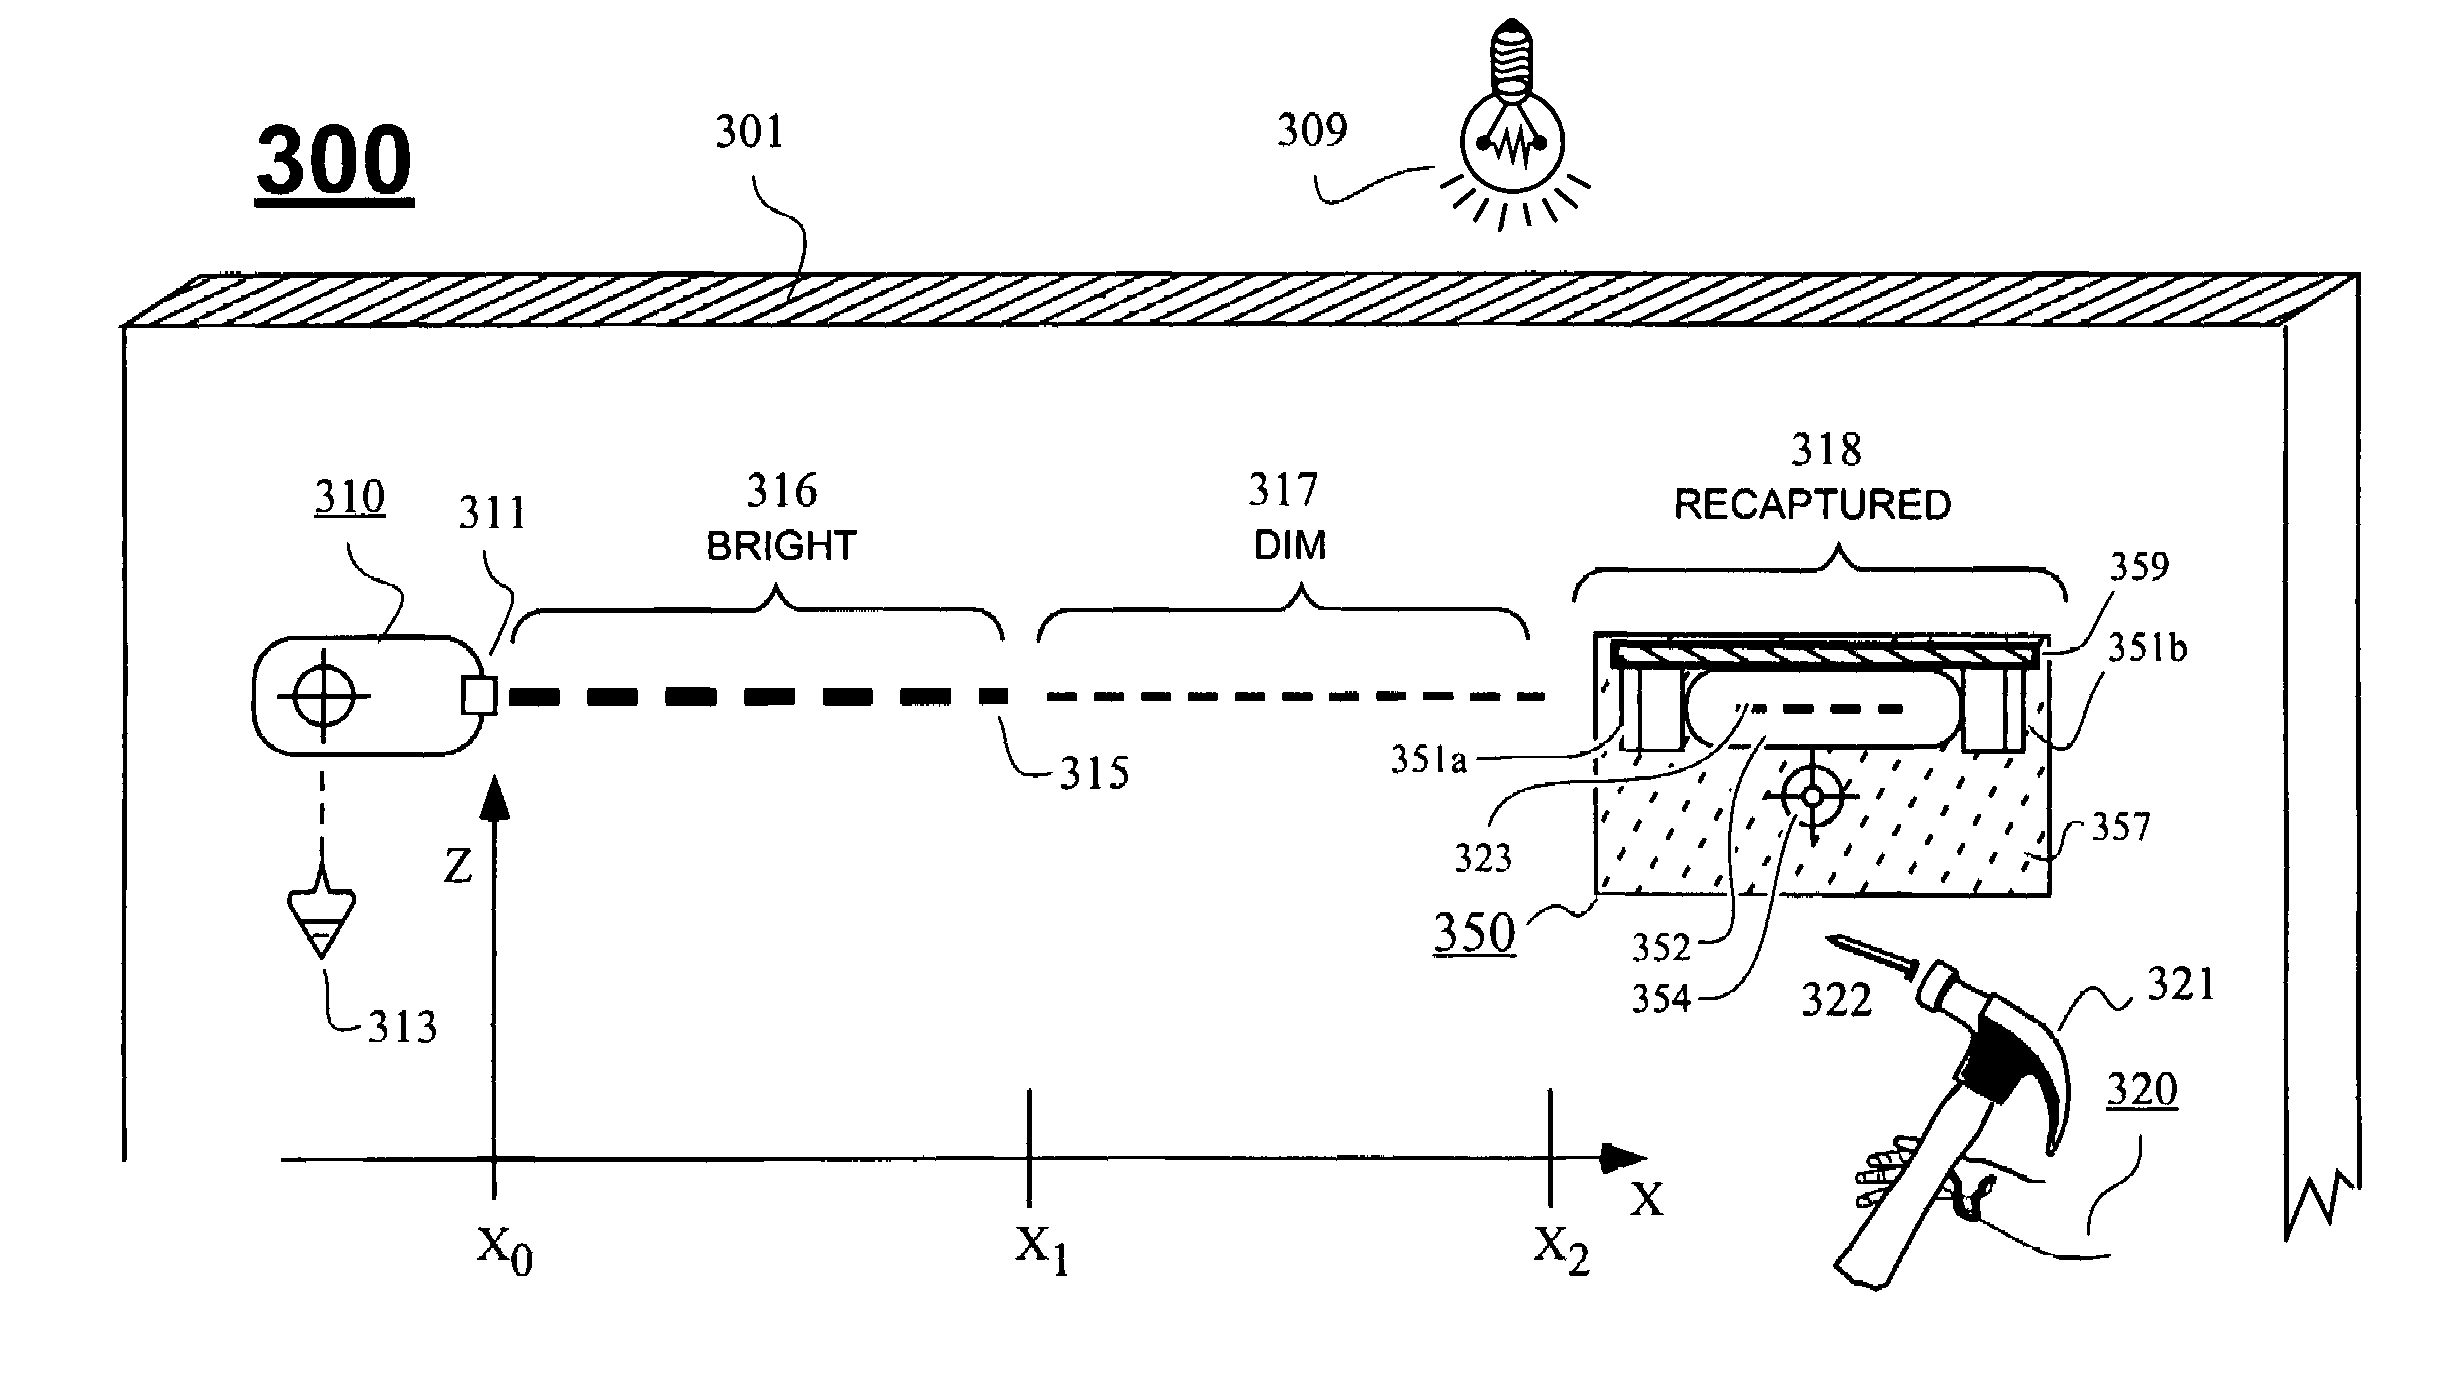 Methods and devices for enhancing intensity of on-surface lines cast by laser line projectors or the like